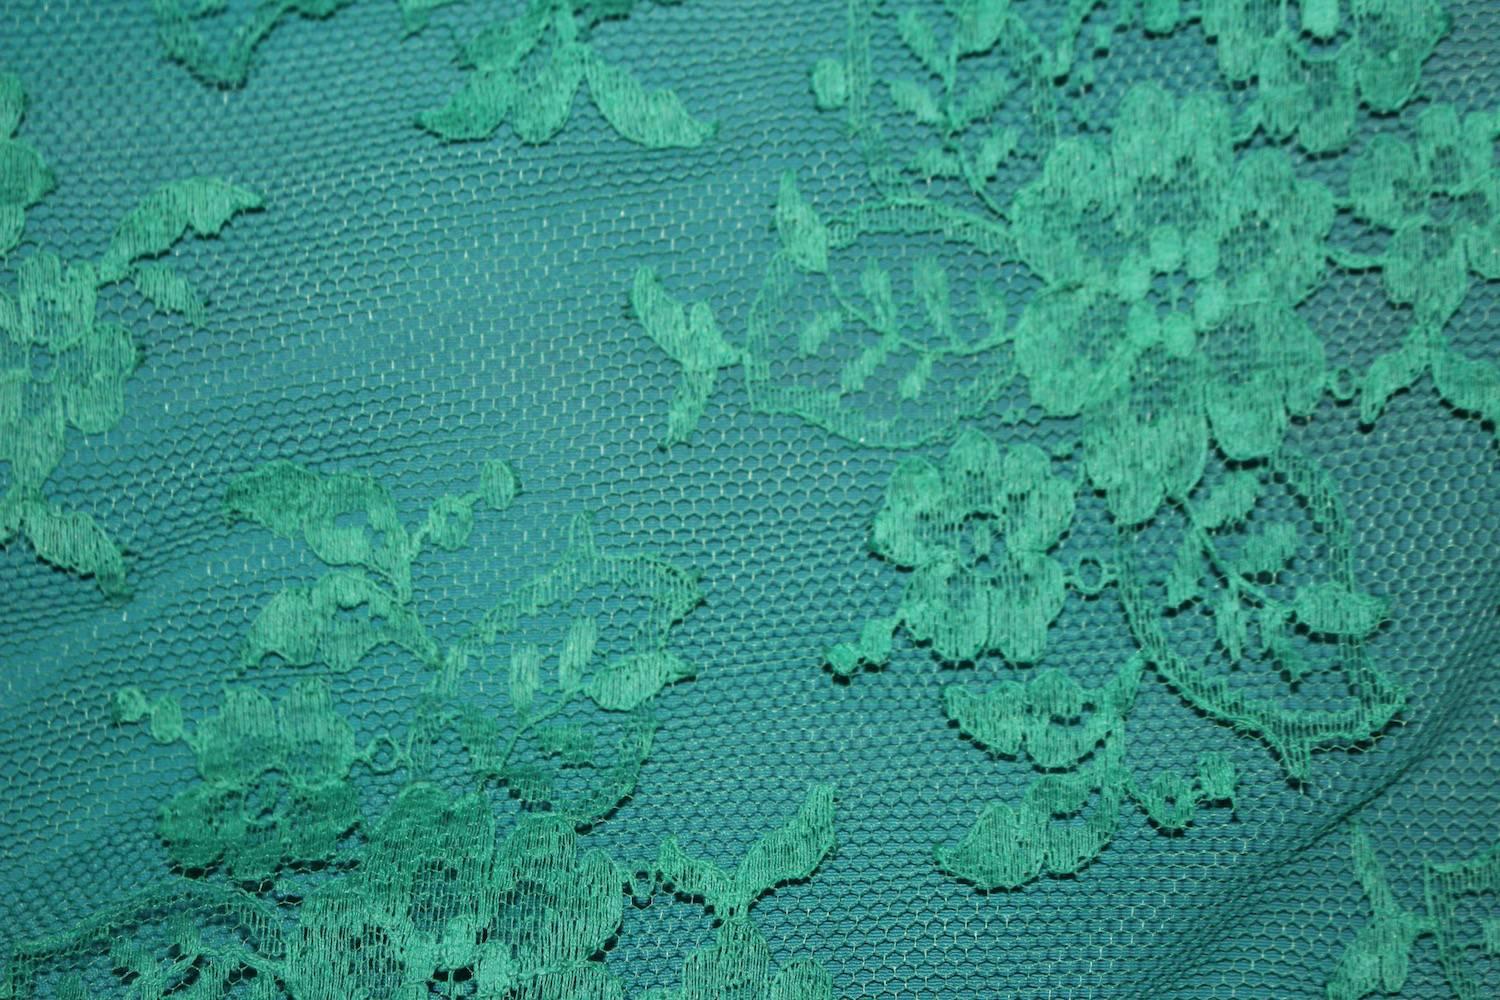 green lace formal dress